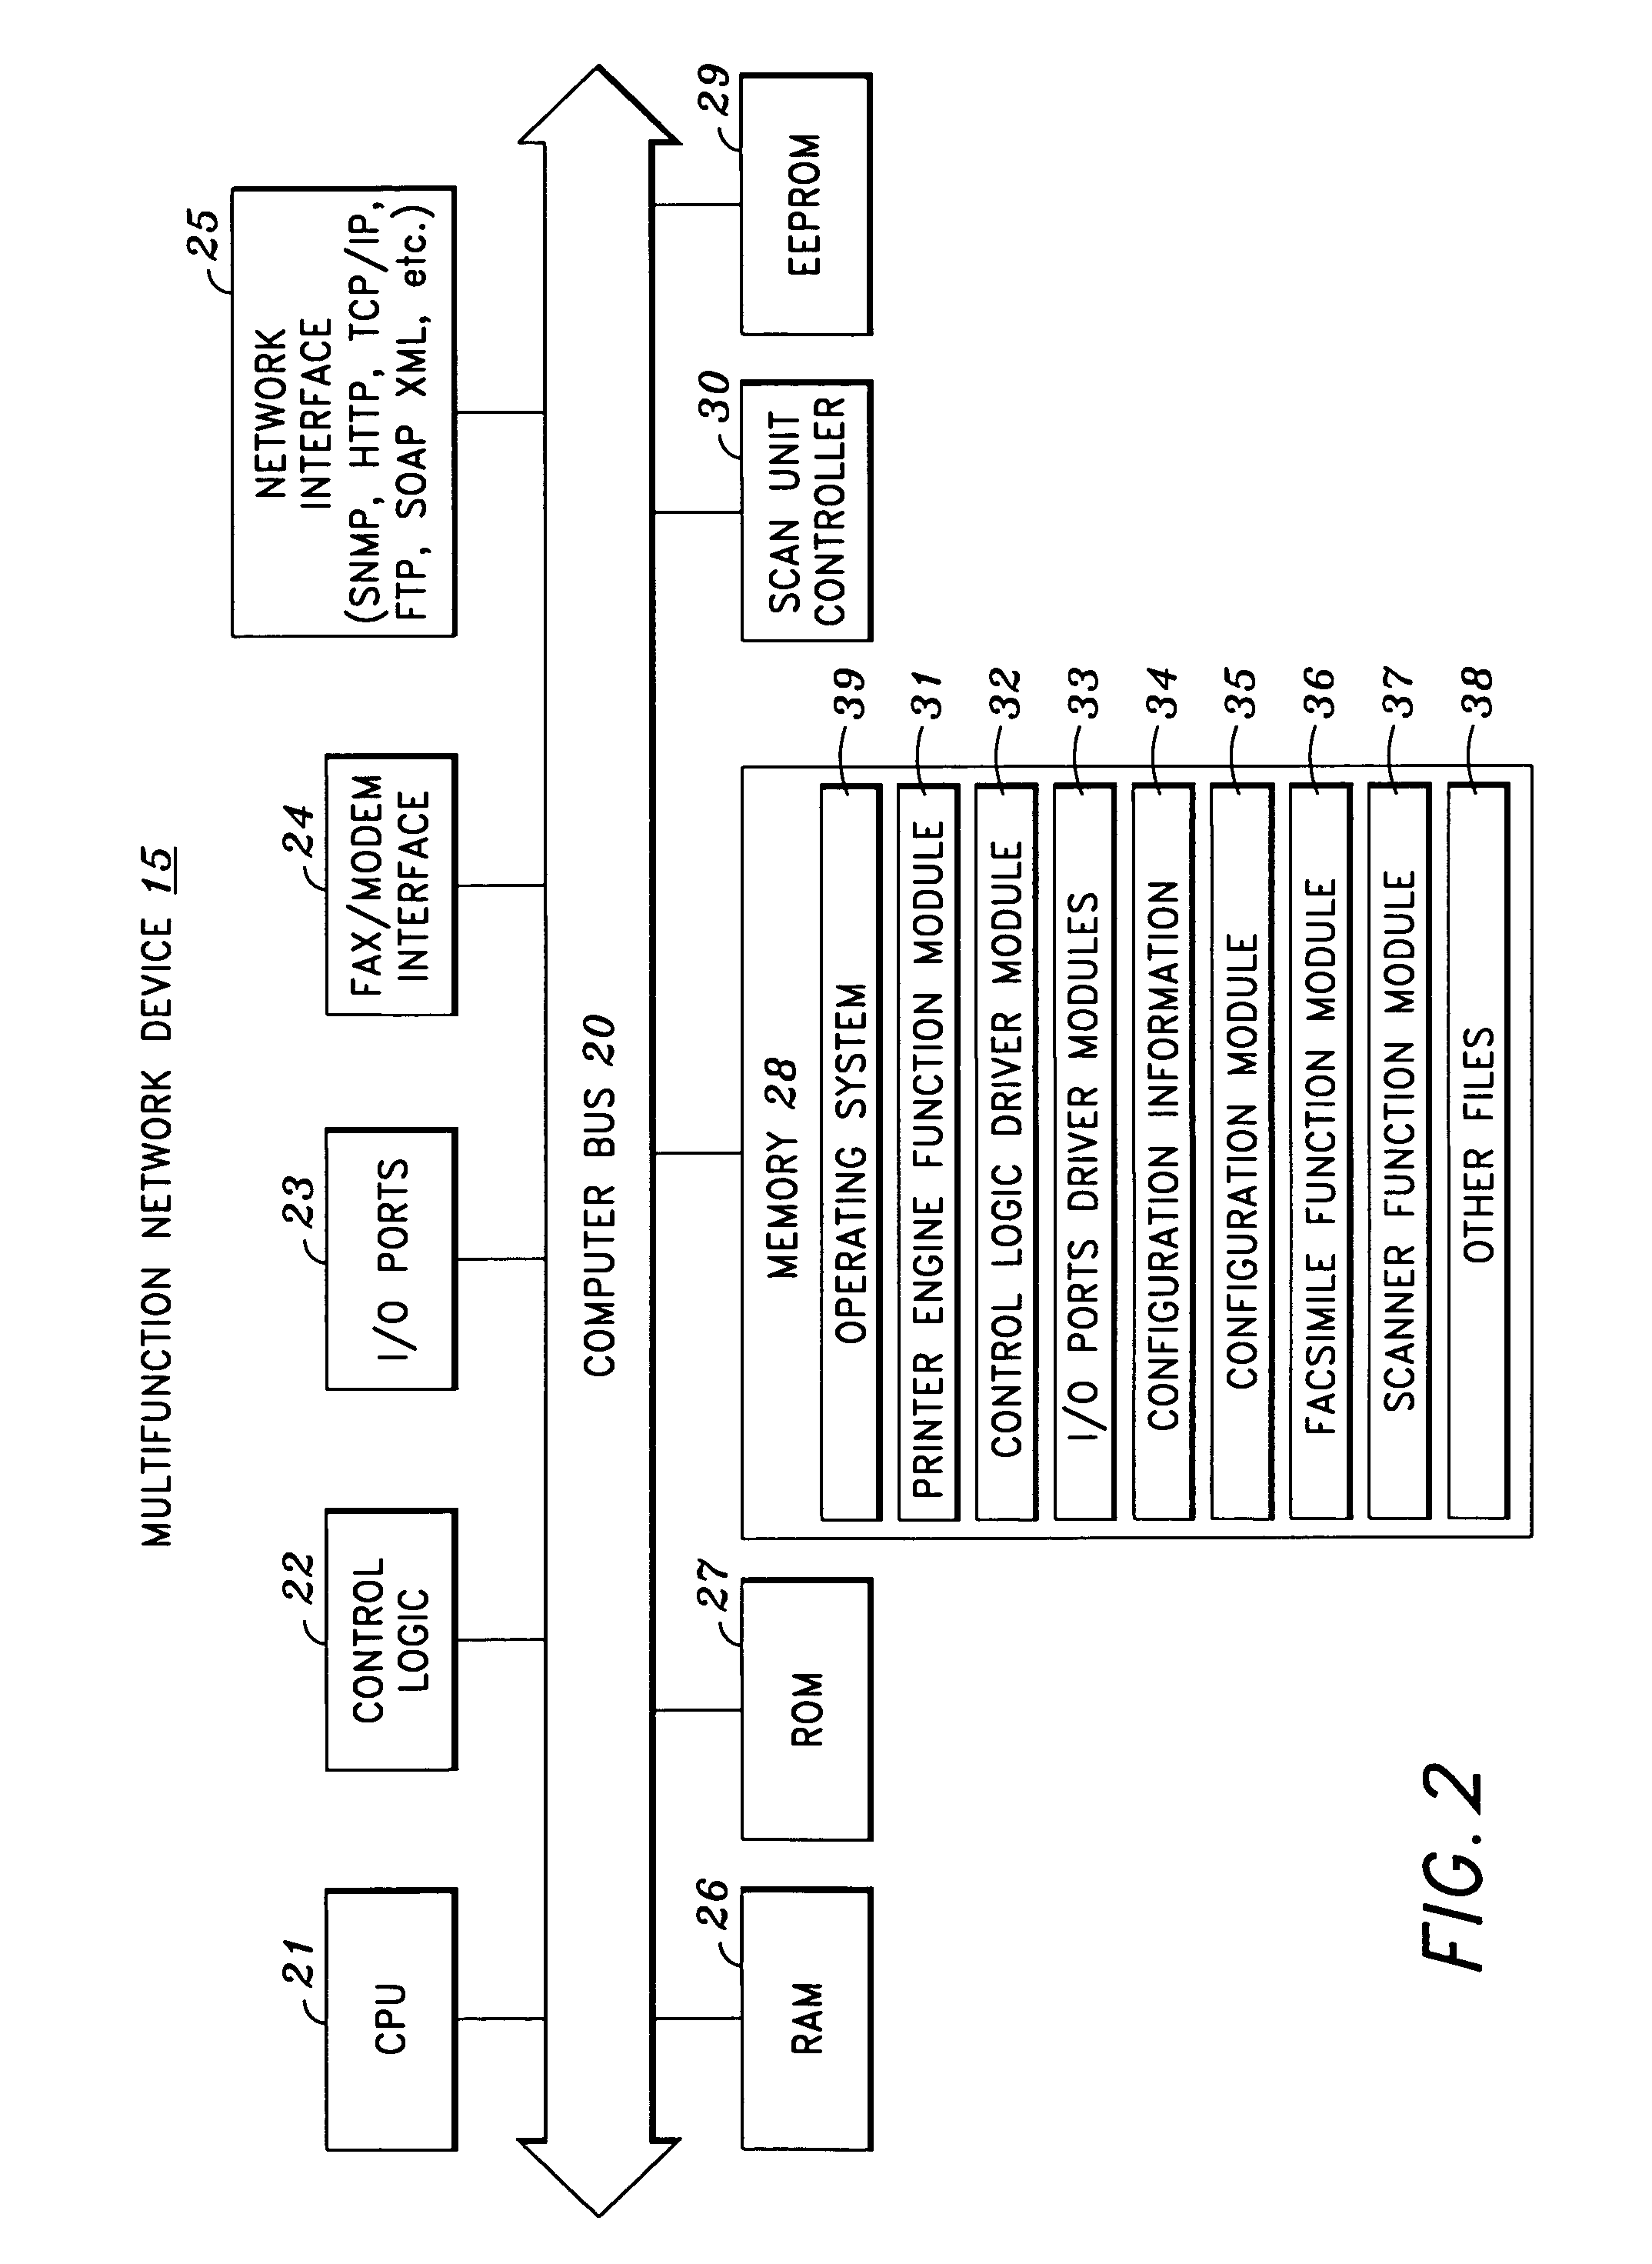 Dynamic network device reconfiguration